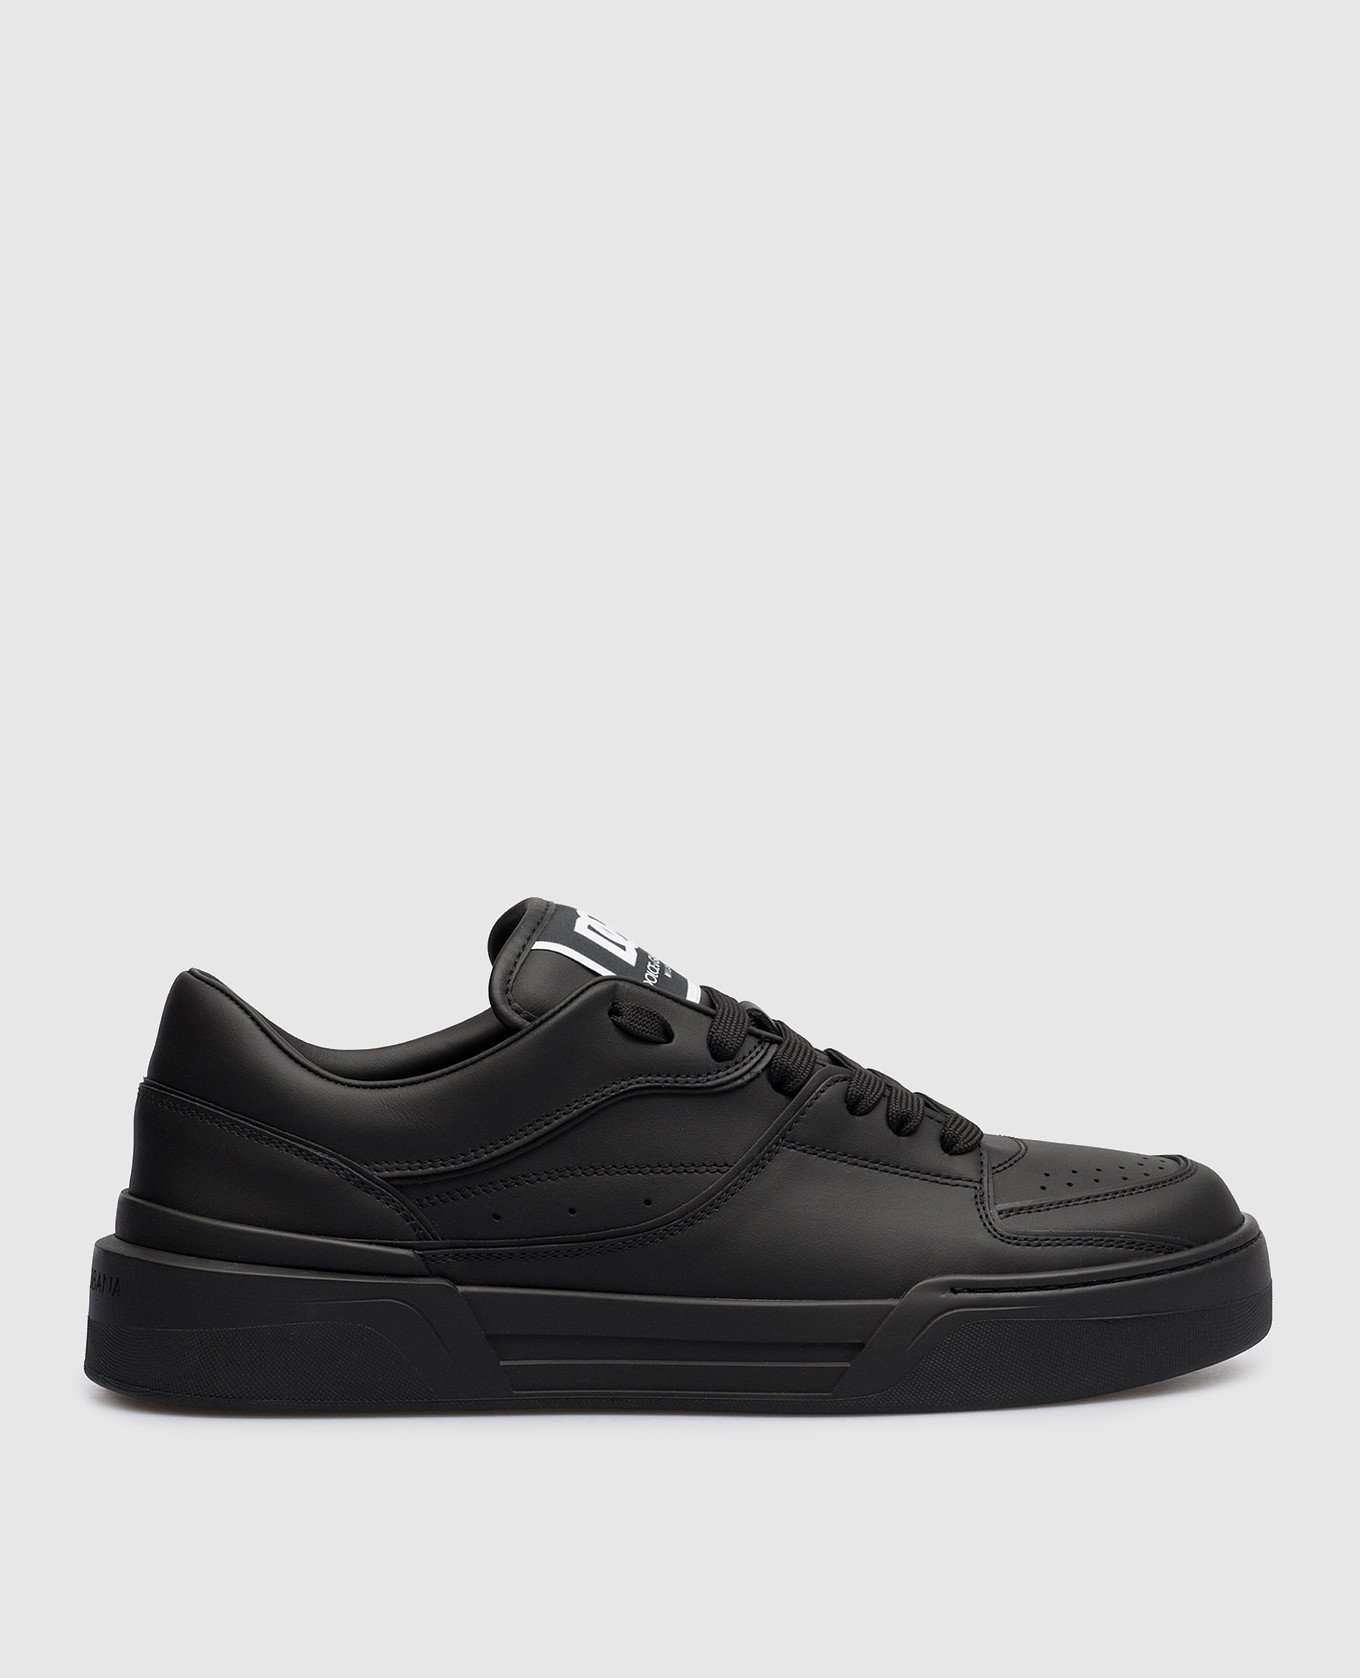 Black leather sneakers from New Roma with logo